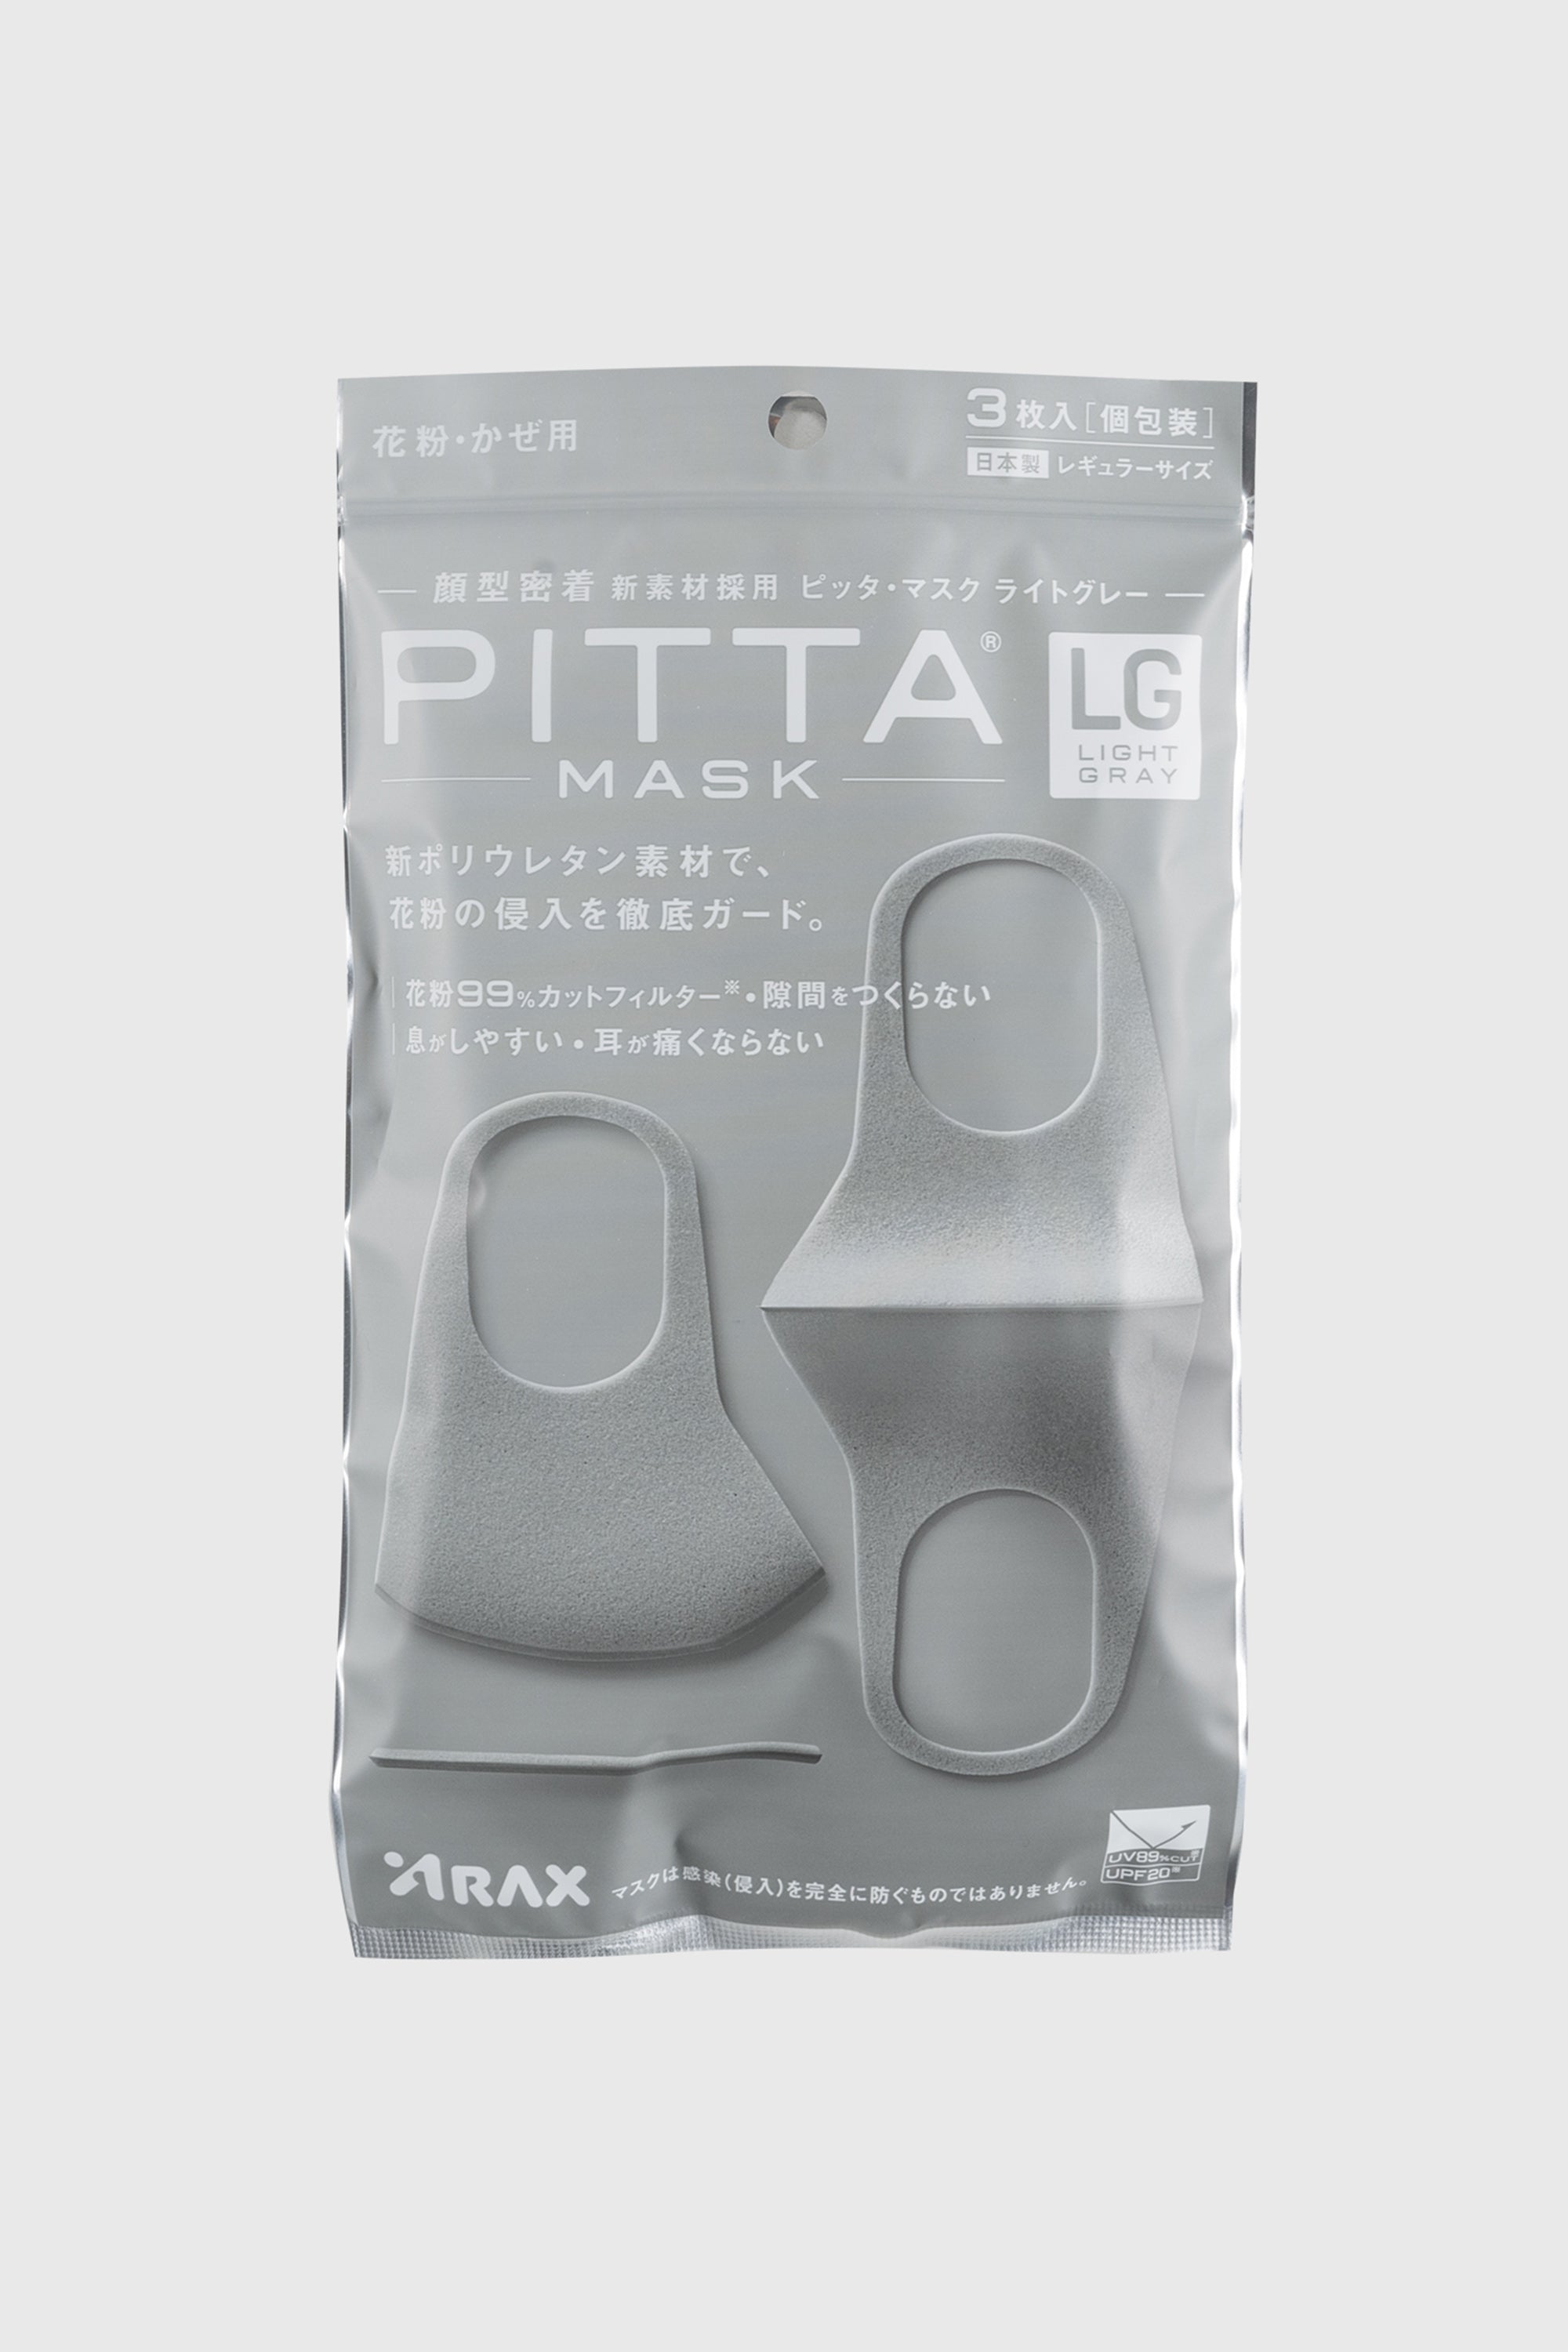 PITTA Face Mask - 3 Pack (Light Gray) - The Official Brand